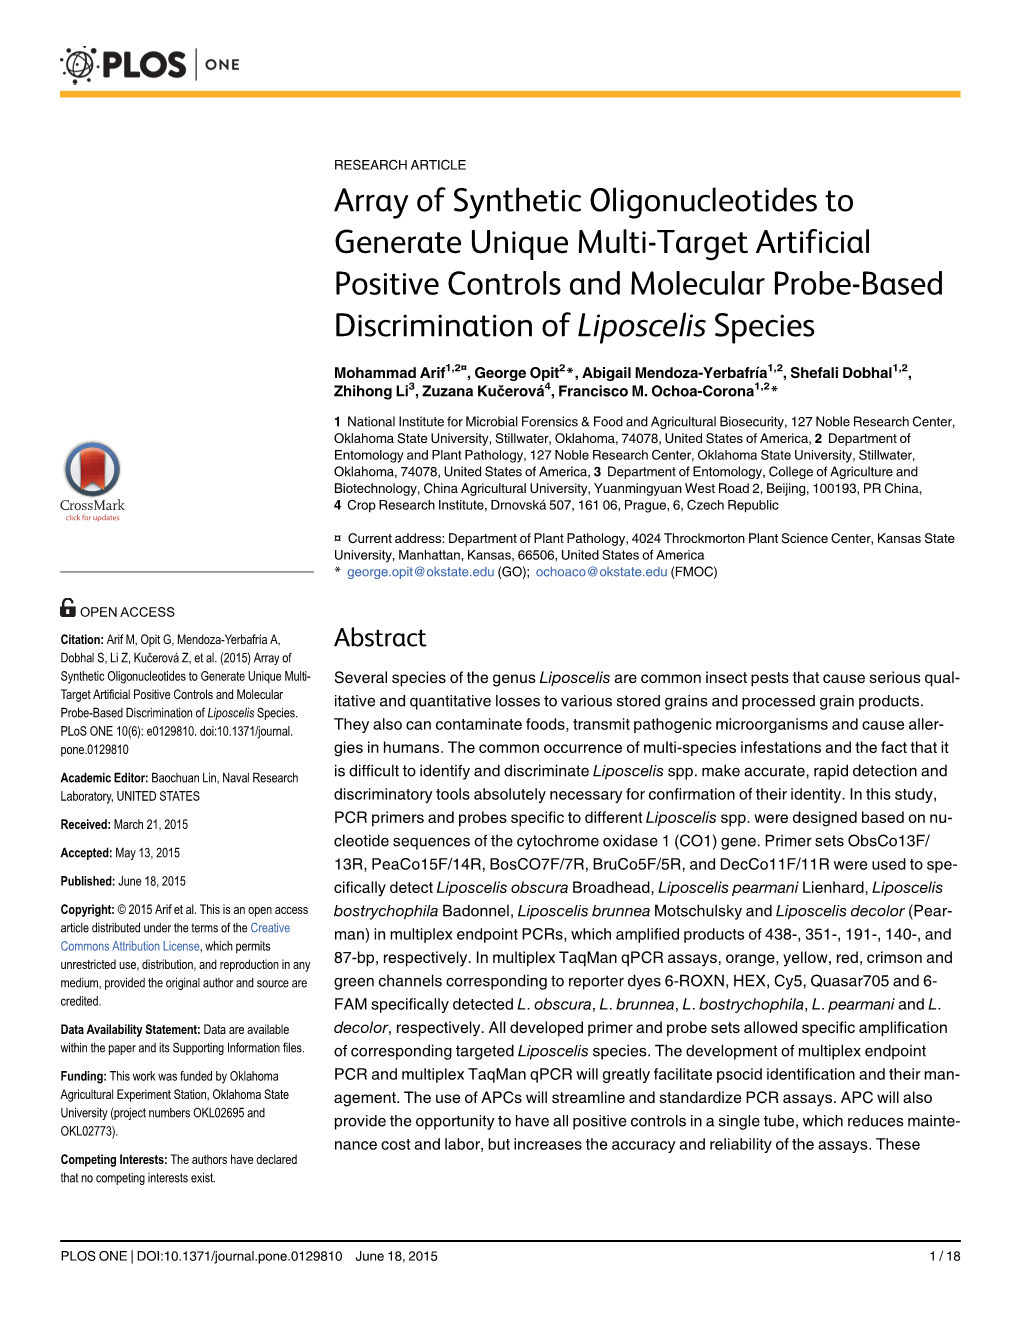 Array of Synthetic Oligonucleotides to Generate Unique Multi-Target Artificial Positive Controls and Molecular Probe-Based Discrimination of Liposcelis Species